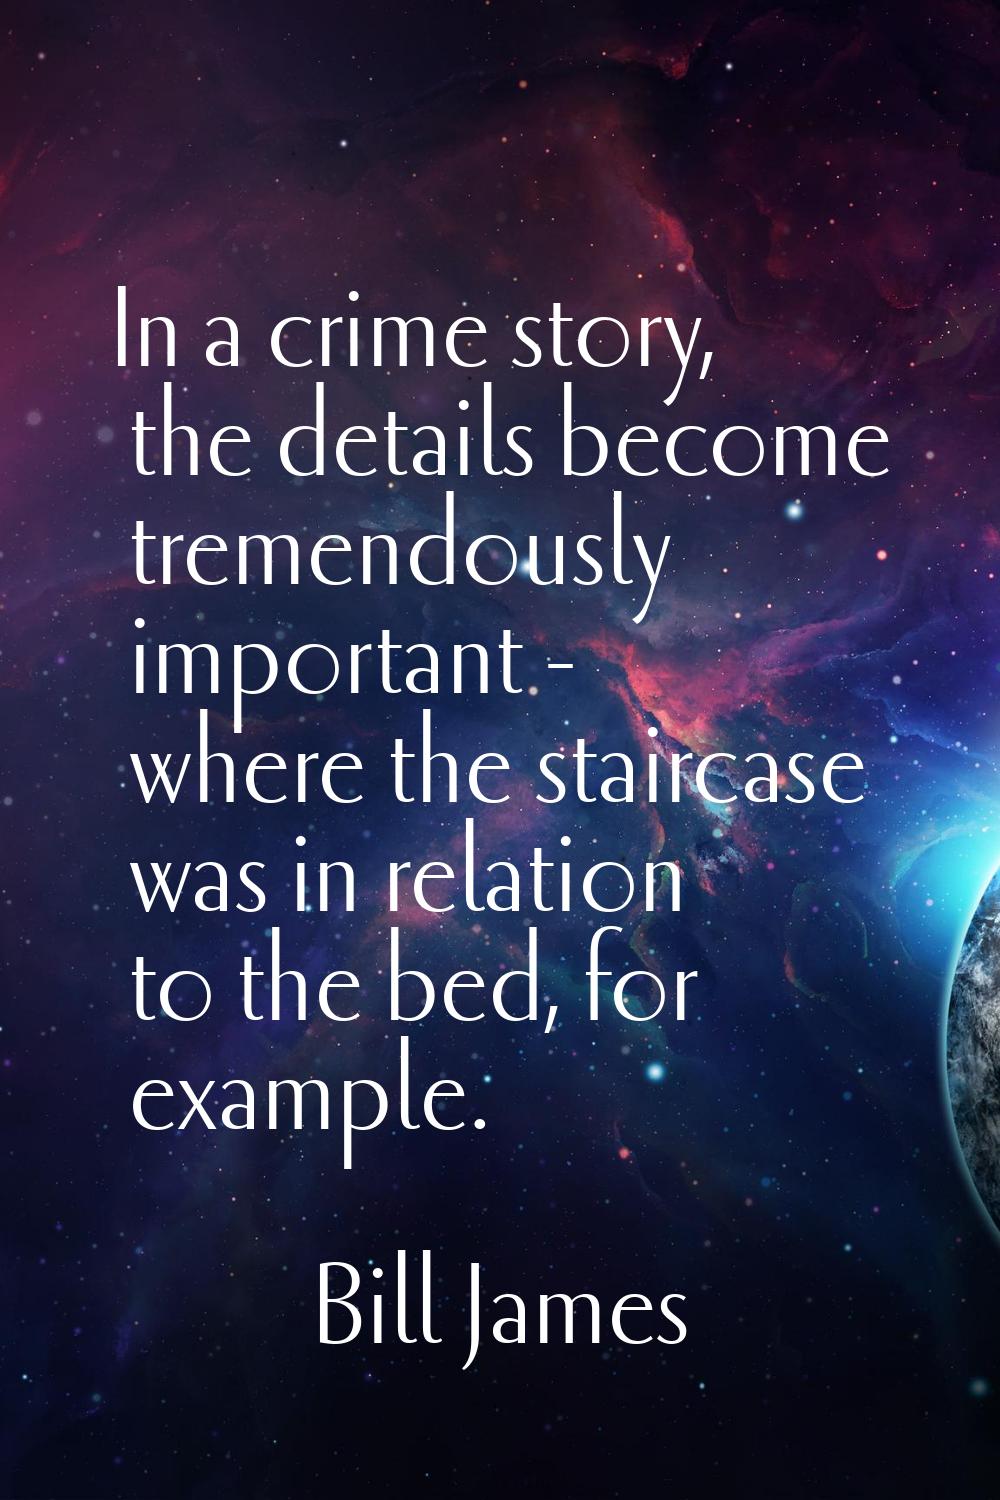 In a crime story, the details become tremendously important - where the staircase was in relation t